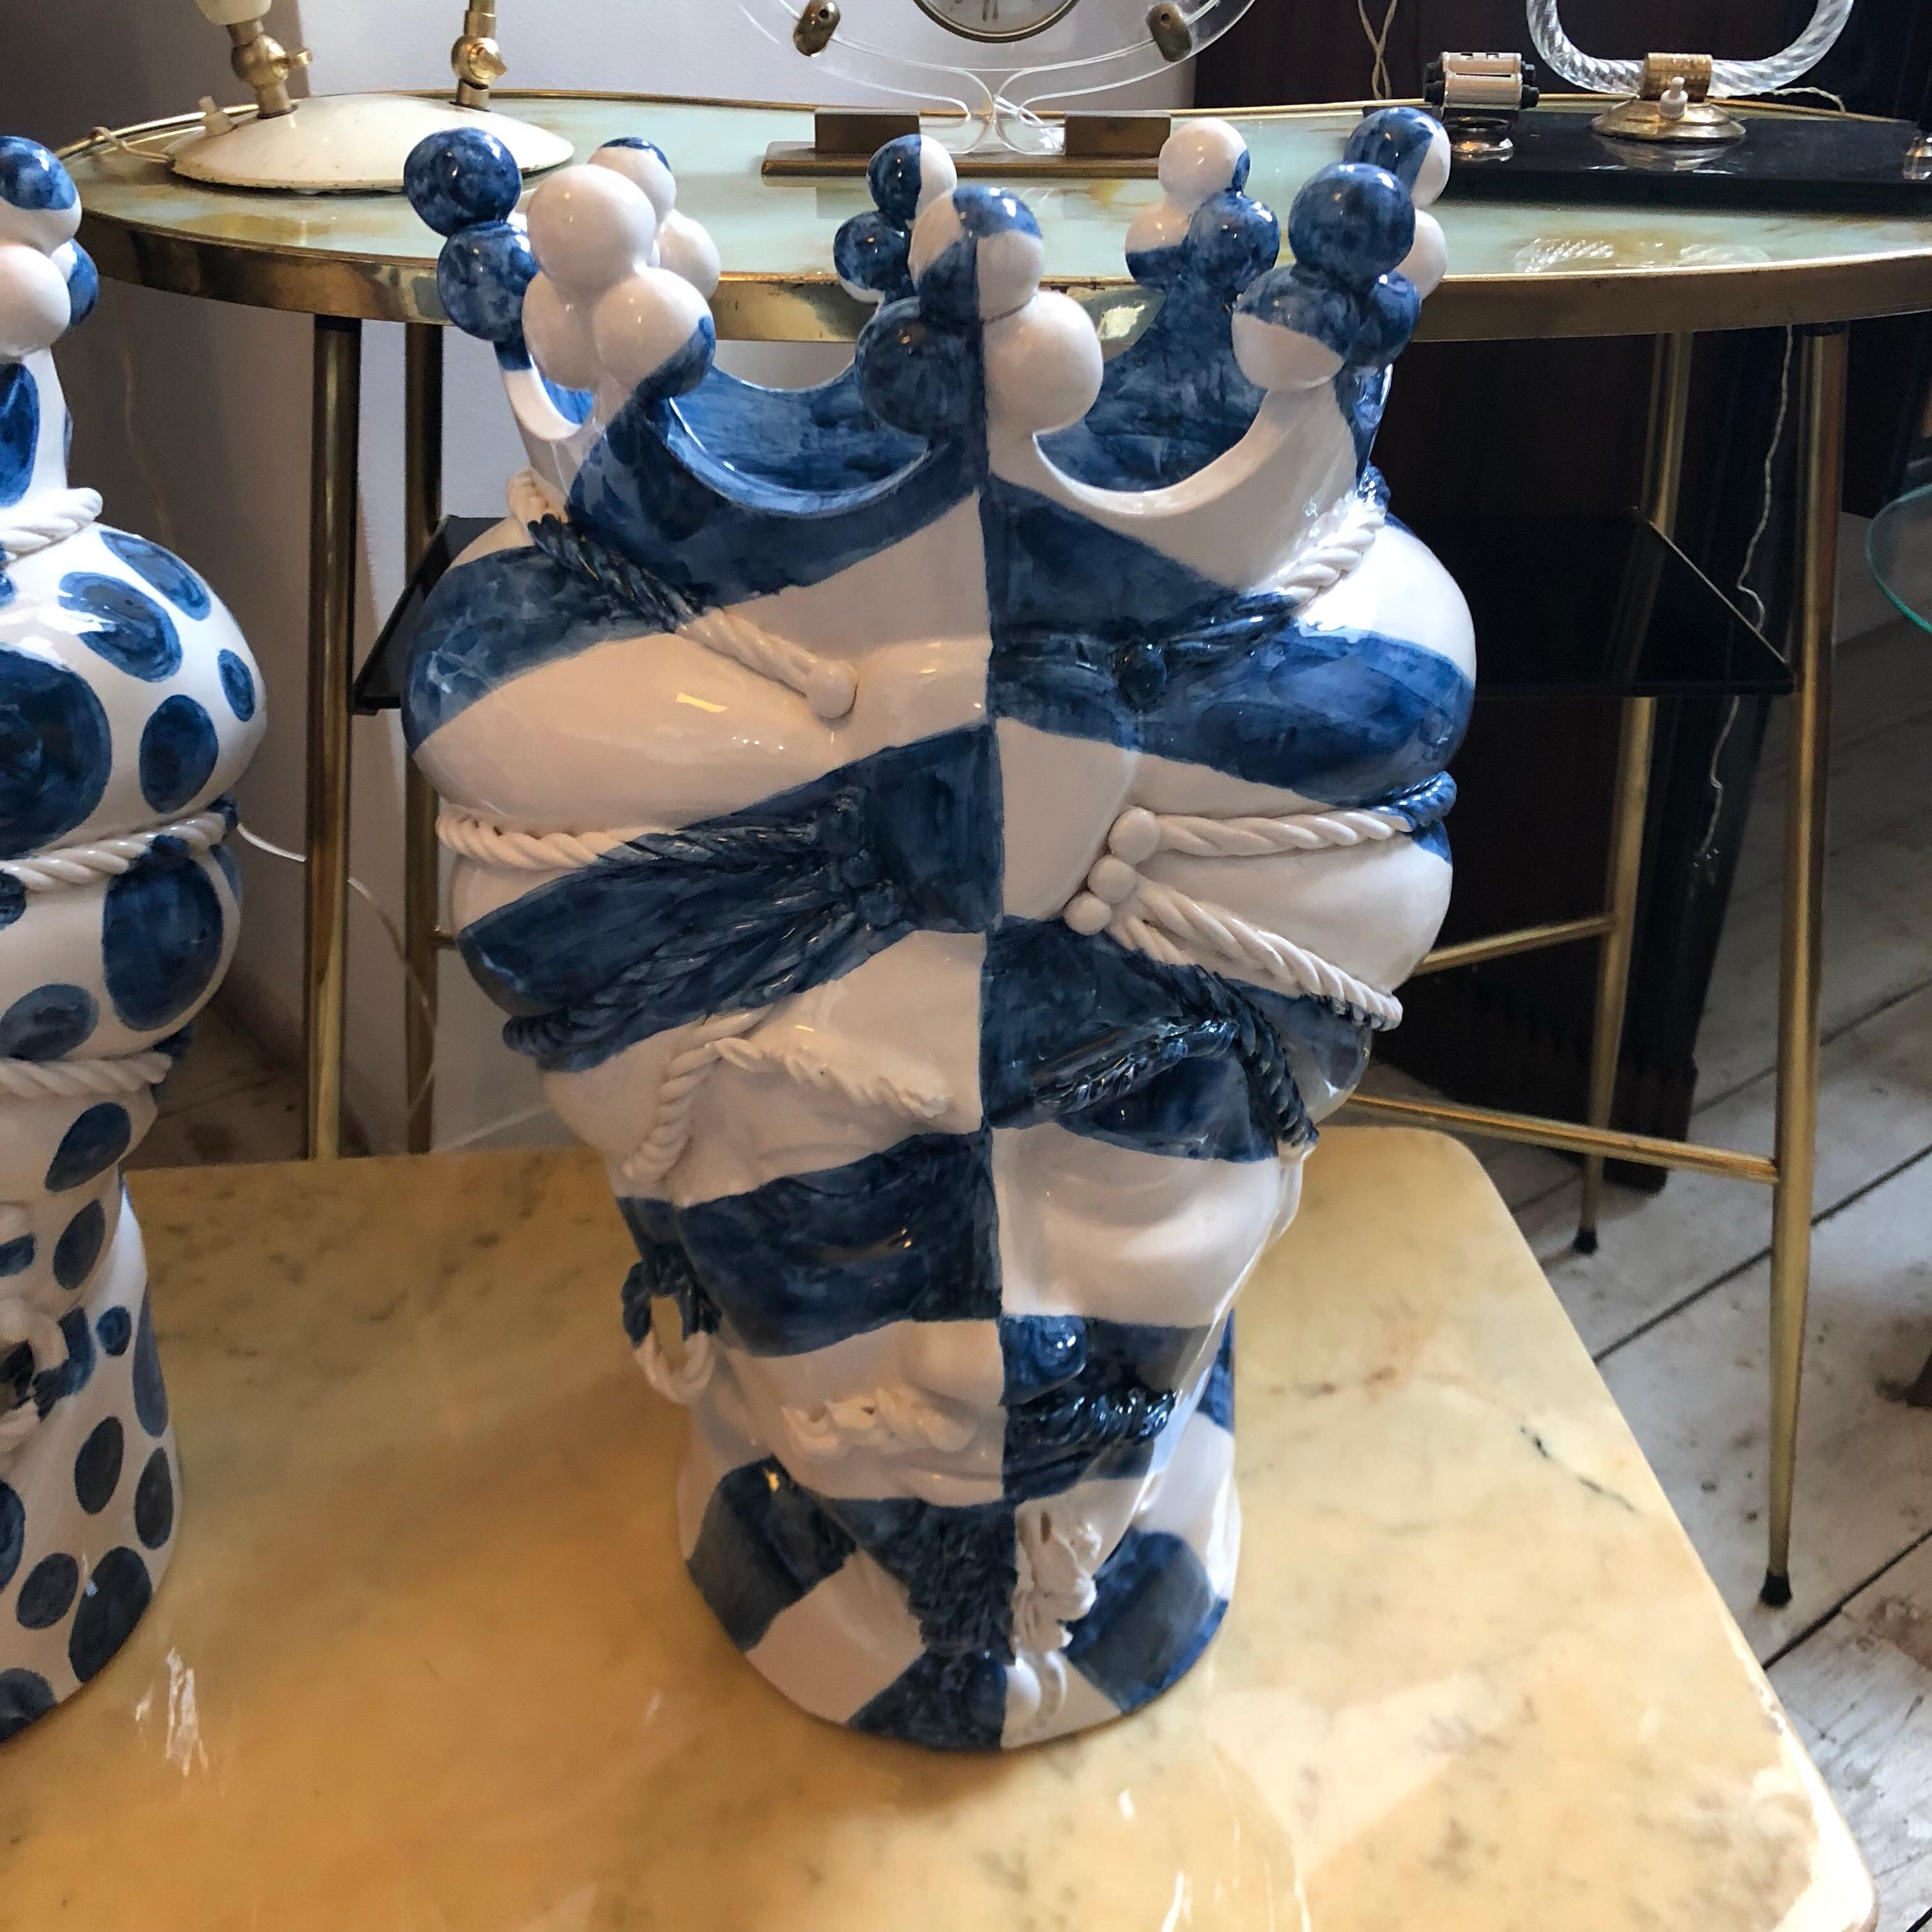 It's an amazing pair of white clay Sicilian Moro's head vases, interpreted in a modern style by a sicilian painter and signed 1/1 MR on the base. There are no copies of these, they are uniques pieces. The legend of the Sicilian Moro's heads speaks